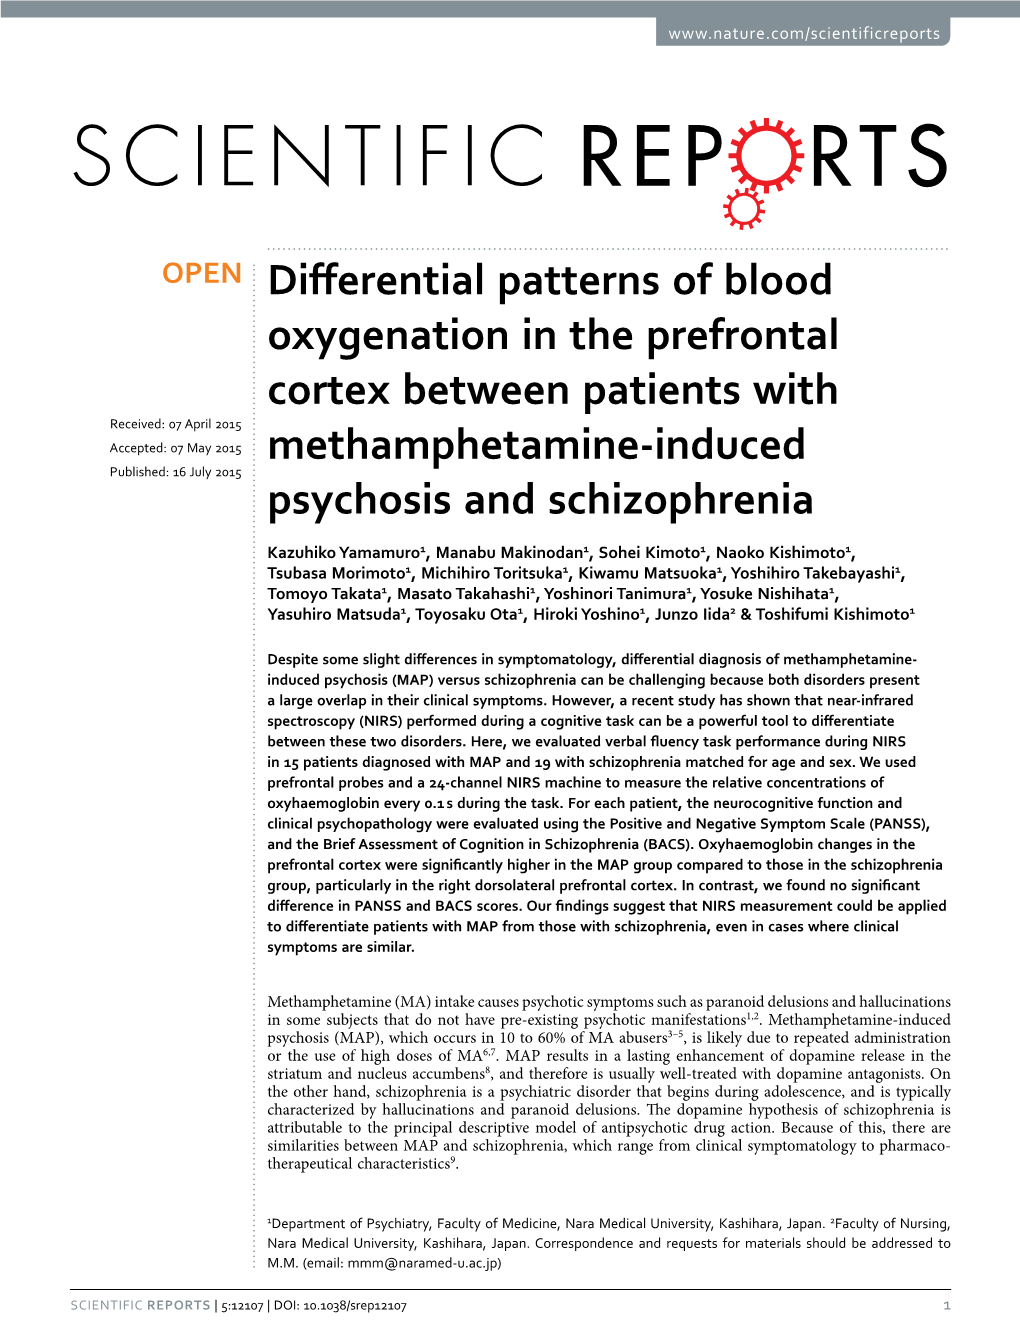 Differential Patterns of Blood Oxygenation in the Prefrontal Cortex